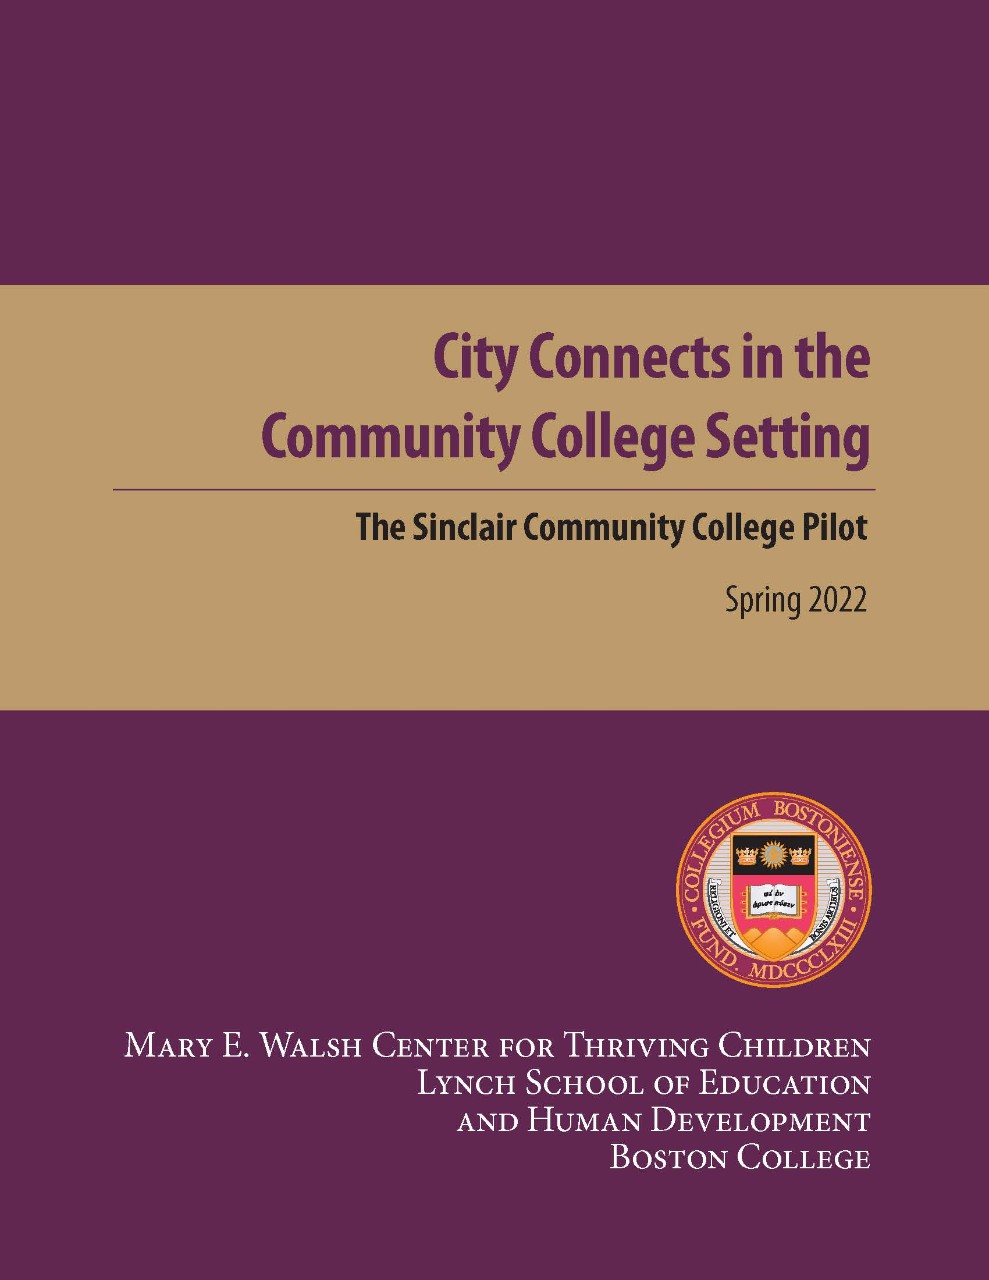 City Connects In the Community College Setting cover image